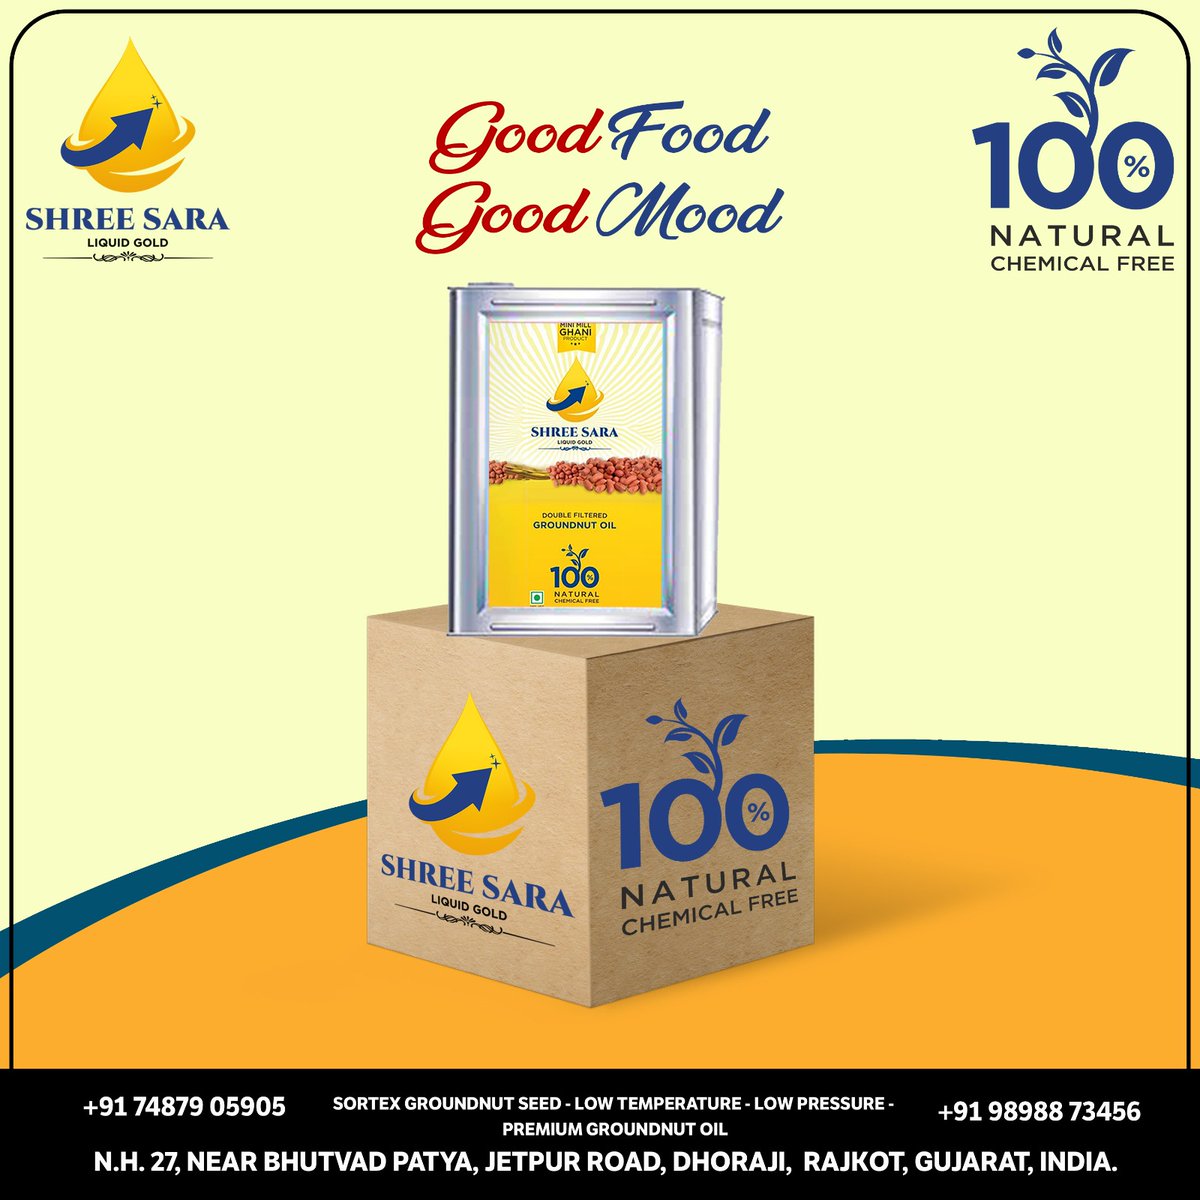 #shreesaraagriexport #agri #AgriExports #groundnutoil #oil #cookingoil #cookwithlove #cookingfood #edibleoil #pureoil #naturaloil #organicoil #pure #natural #cookingwithlove #chemicalfree #healthyheart #healthycooking #healthyfood #healthyliving #Gujarat #india